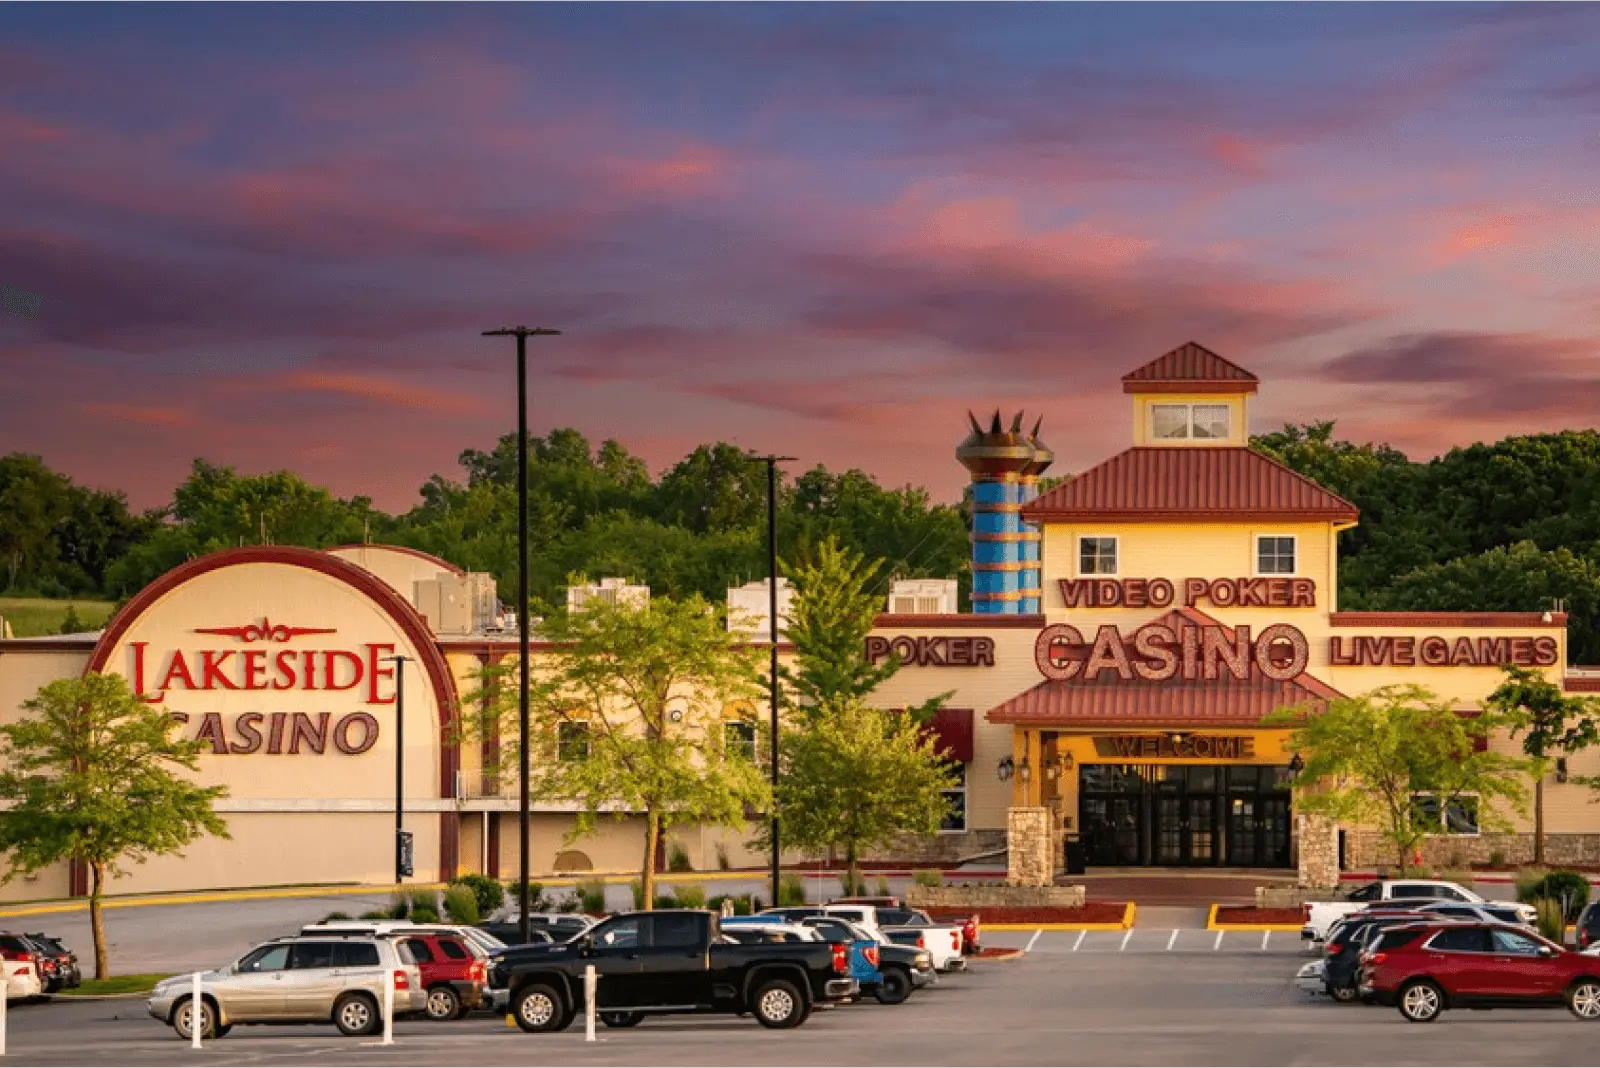 Lakeside Casino Parking View - Home